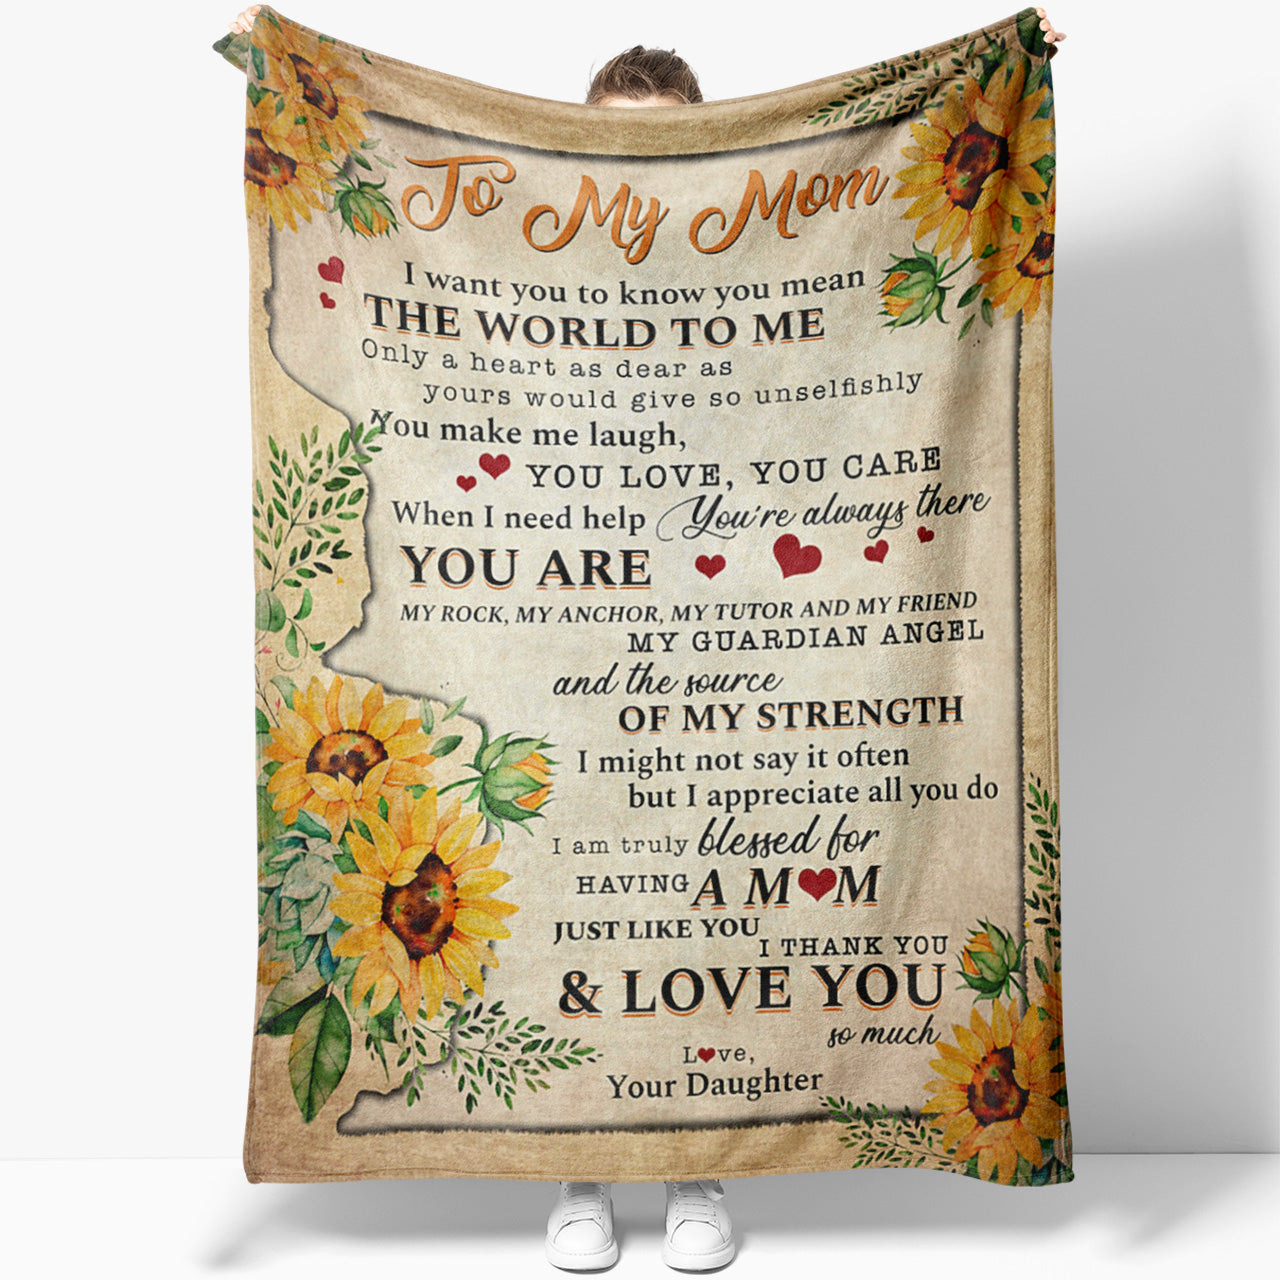 Blanket Gift Ideas For Mom, You Mean The World